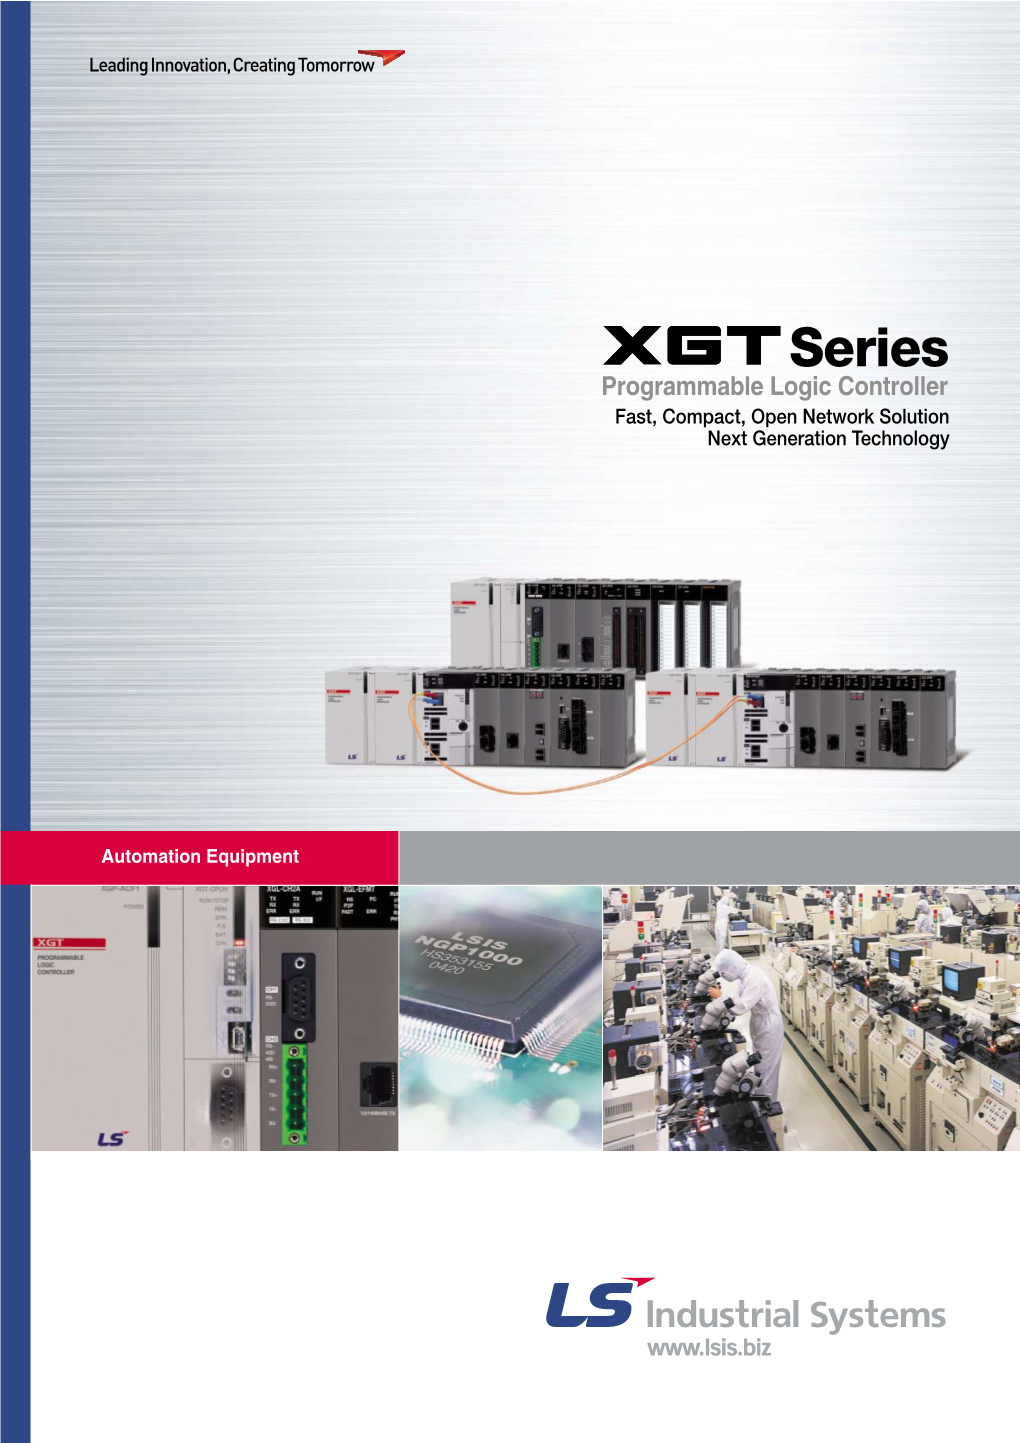 Series Programmable Logic Controller Fast, Compact, Open Network Solution Next Generation Technology